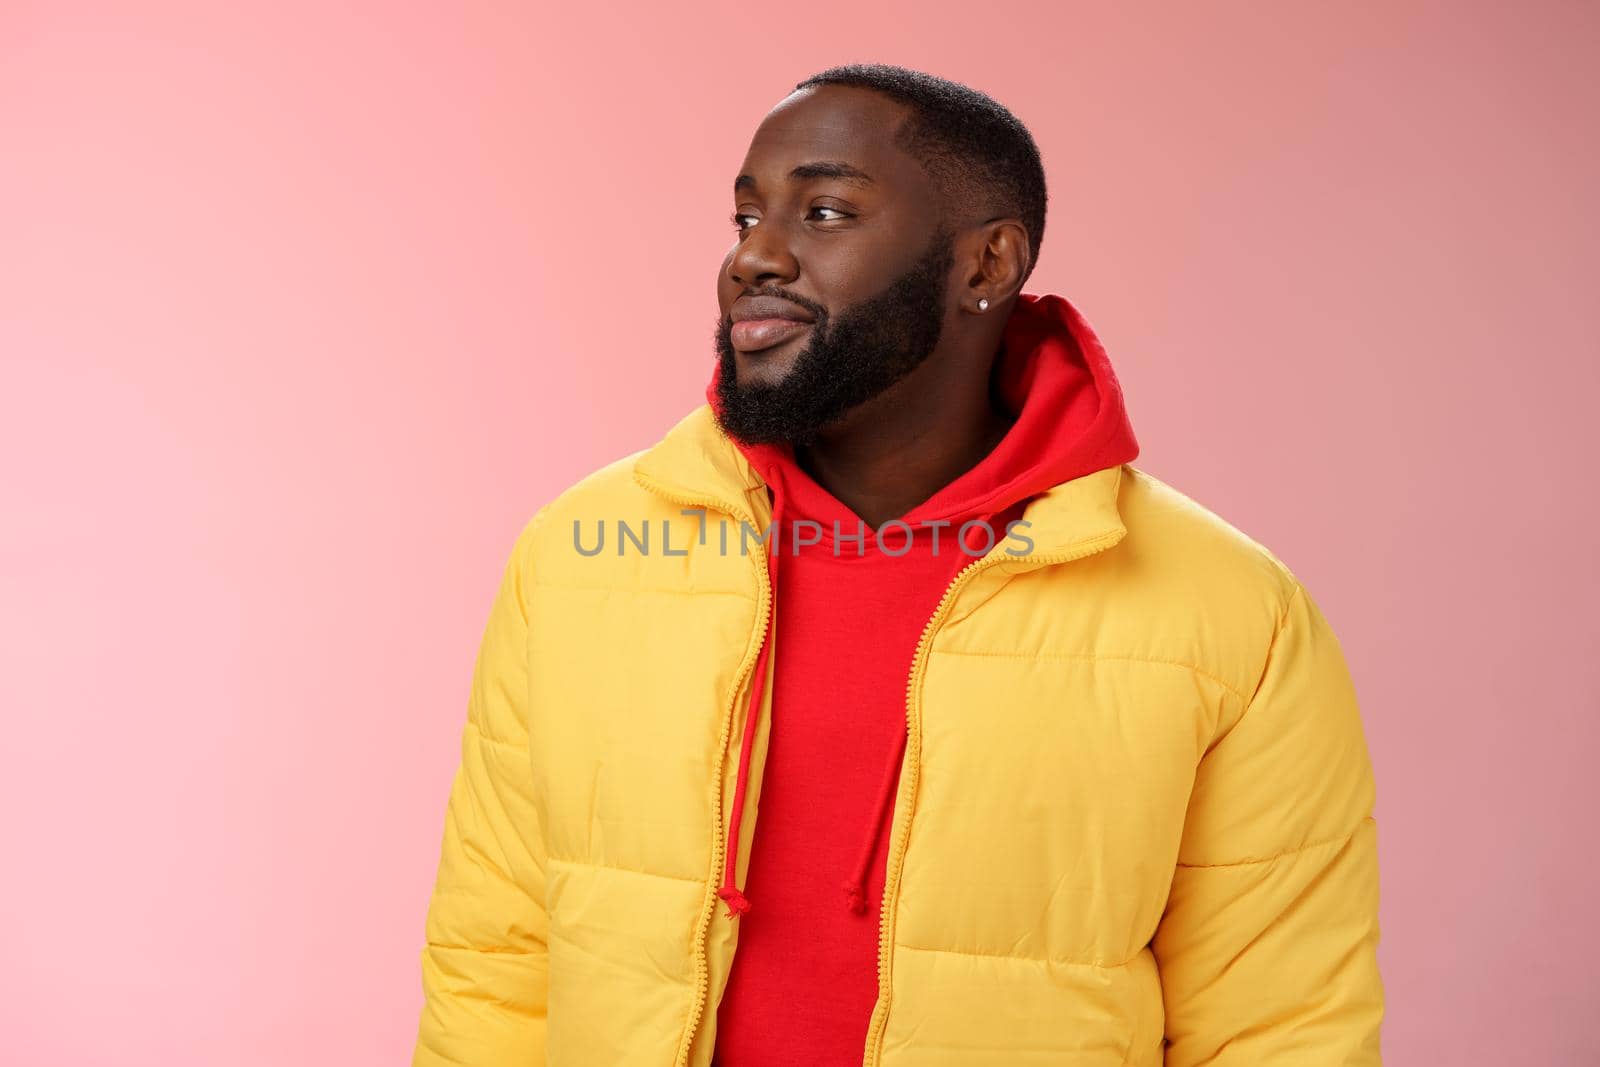 Dreamy happy optimistic black bearded man looking left daydreaming recalling nice moments, enjoying warm peaceful weather walking park feel calm relieved, standing pink background smiling cute.